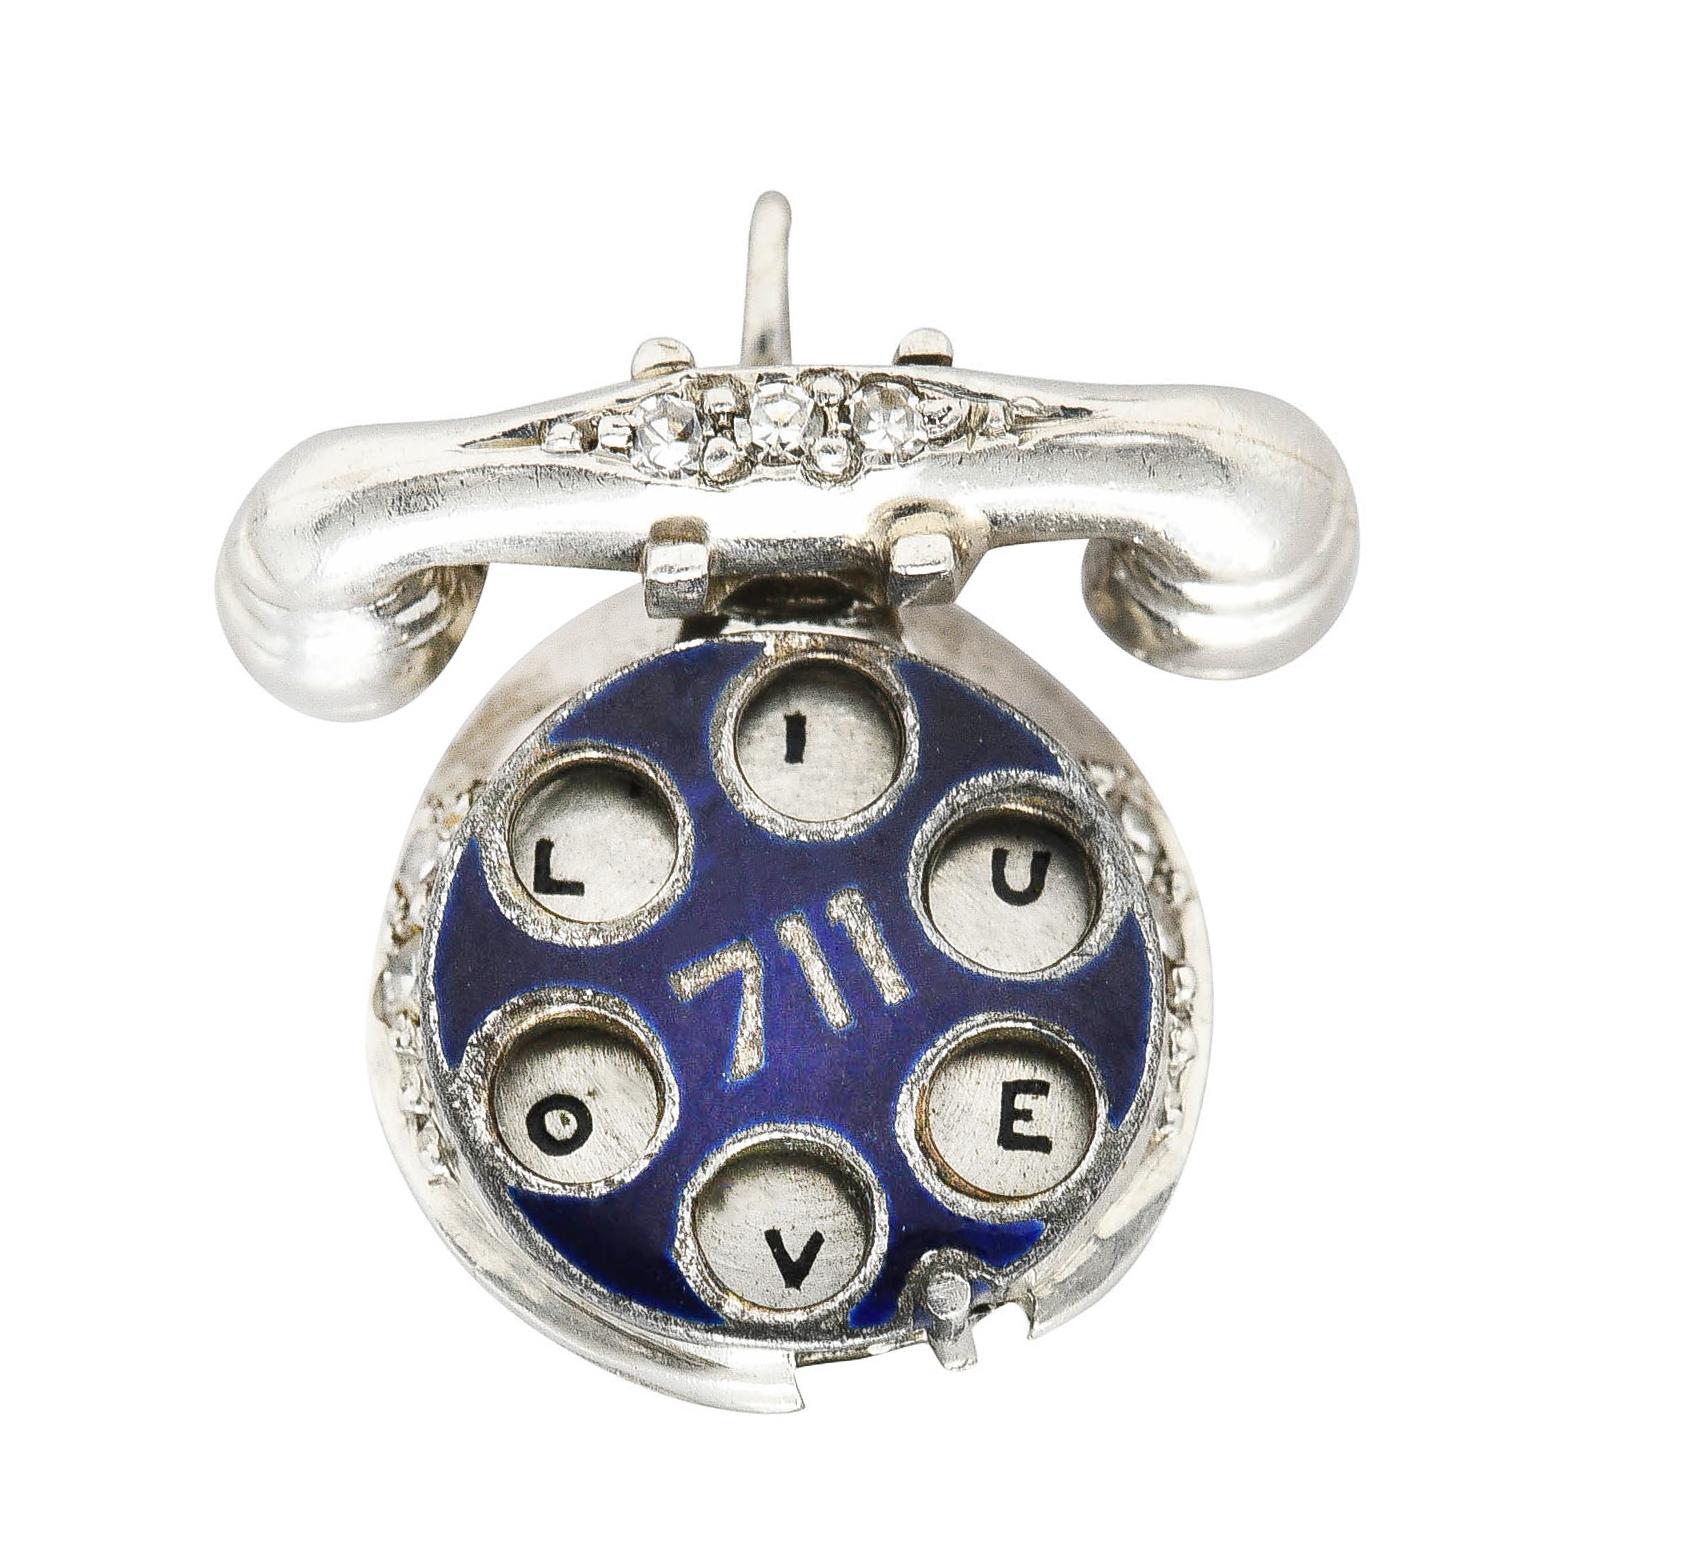 Designed as a rotary phone featuring enamel dial. Opaque navy blue - exhibiting minimal loss. Centering the number '711' and rotates. Spelling out 'HELLO! I LOVE U'. Accented by single cut diamonds. Weighing approximately 0.06 carat total. Eye clean